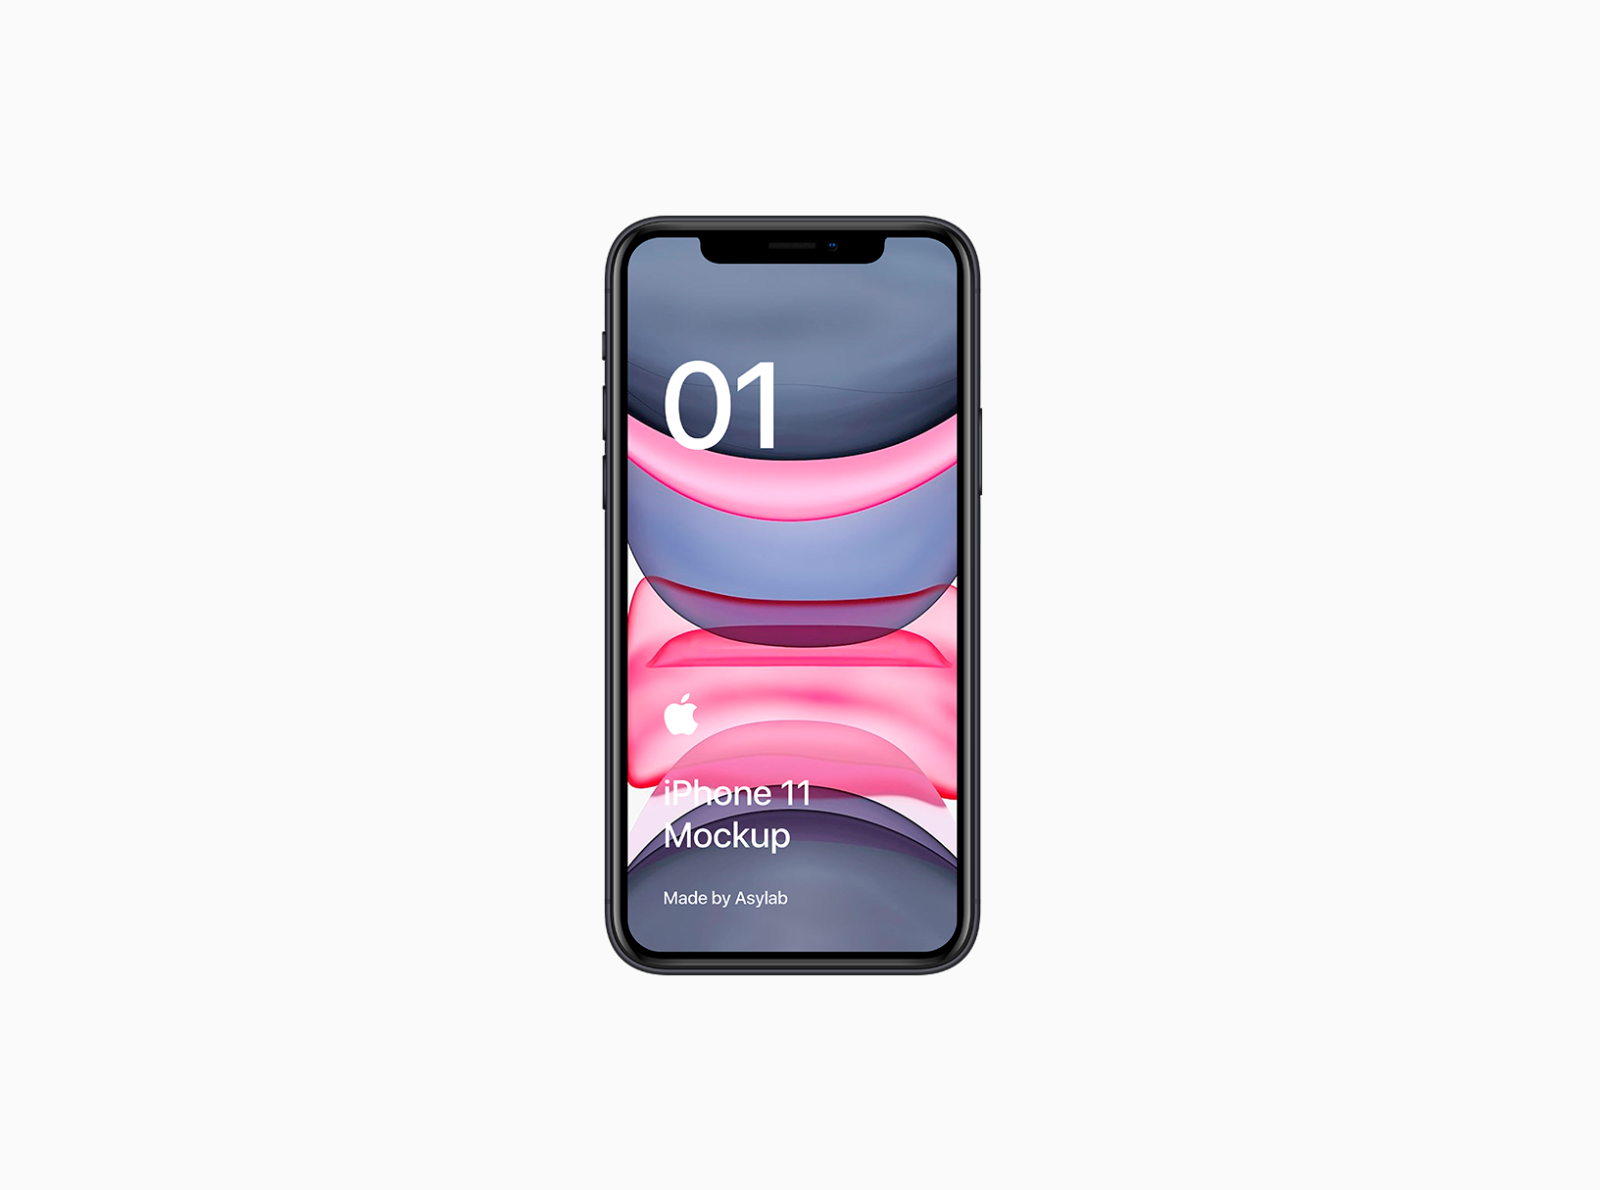 Download Freebie iPhone 11 Mockup - PSD by Asylab on Dribbble